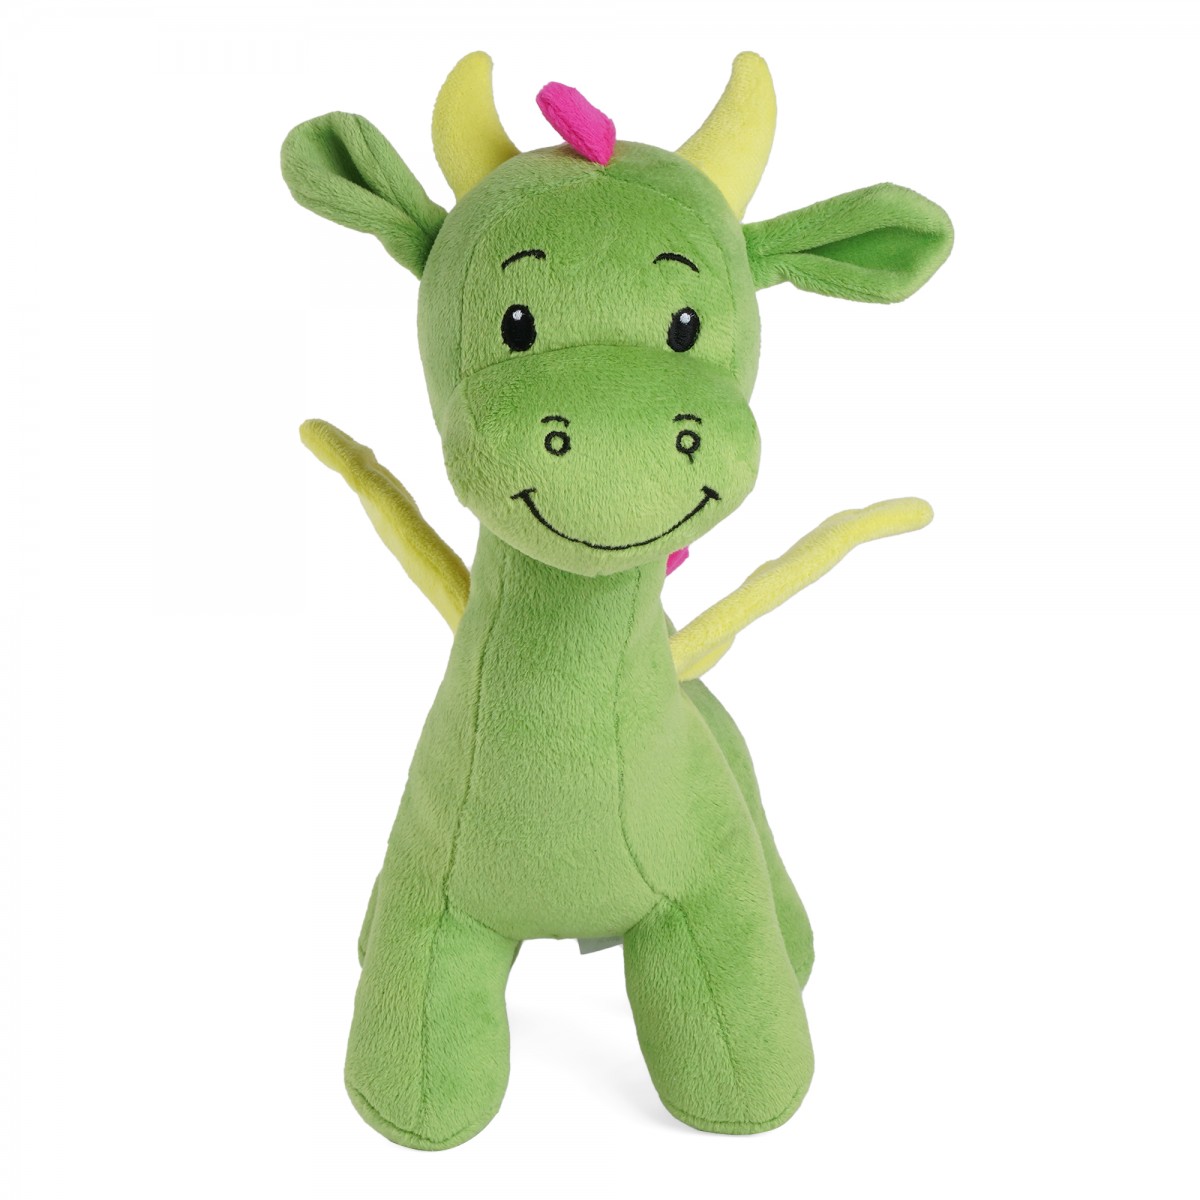 Huggable Cuddly Veto Dragon Stuffed Toy By Fuzzbuzz, Soft Toys for Kids, Cute Plushies Green, For Kids Of Age 2 Years & Above, 26cm